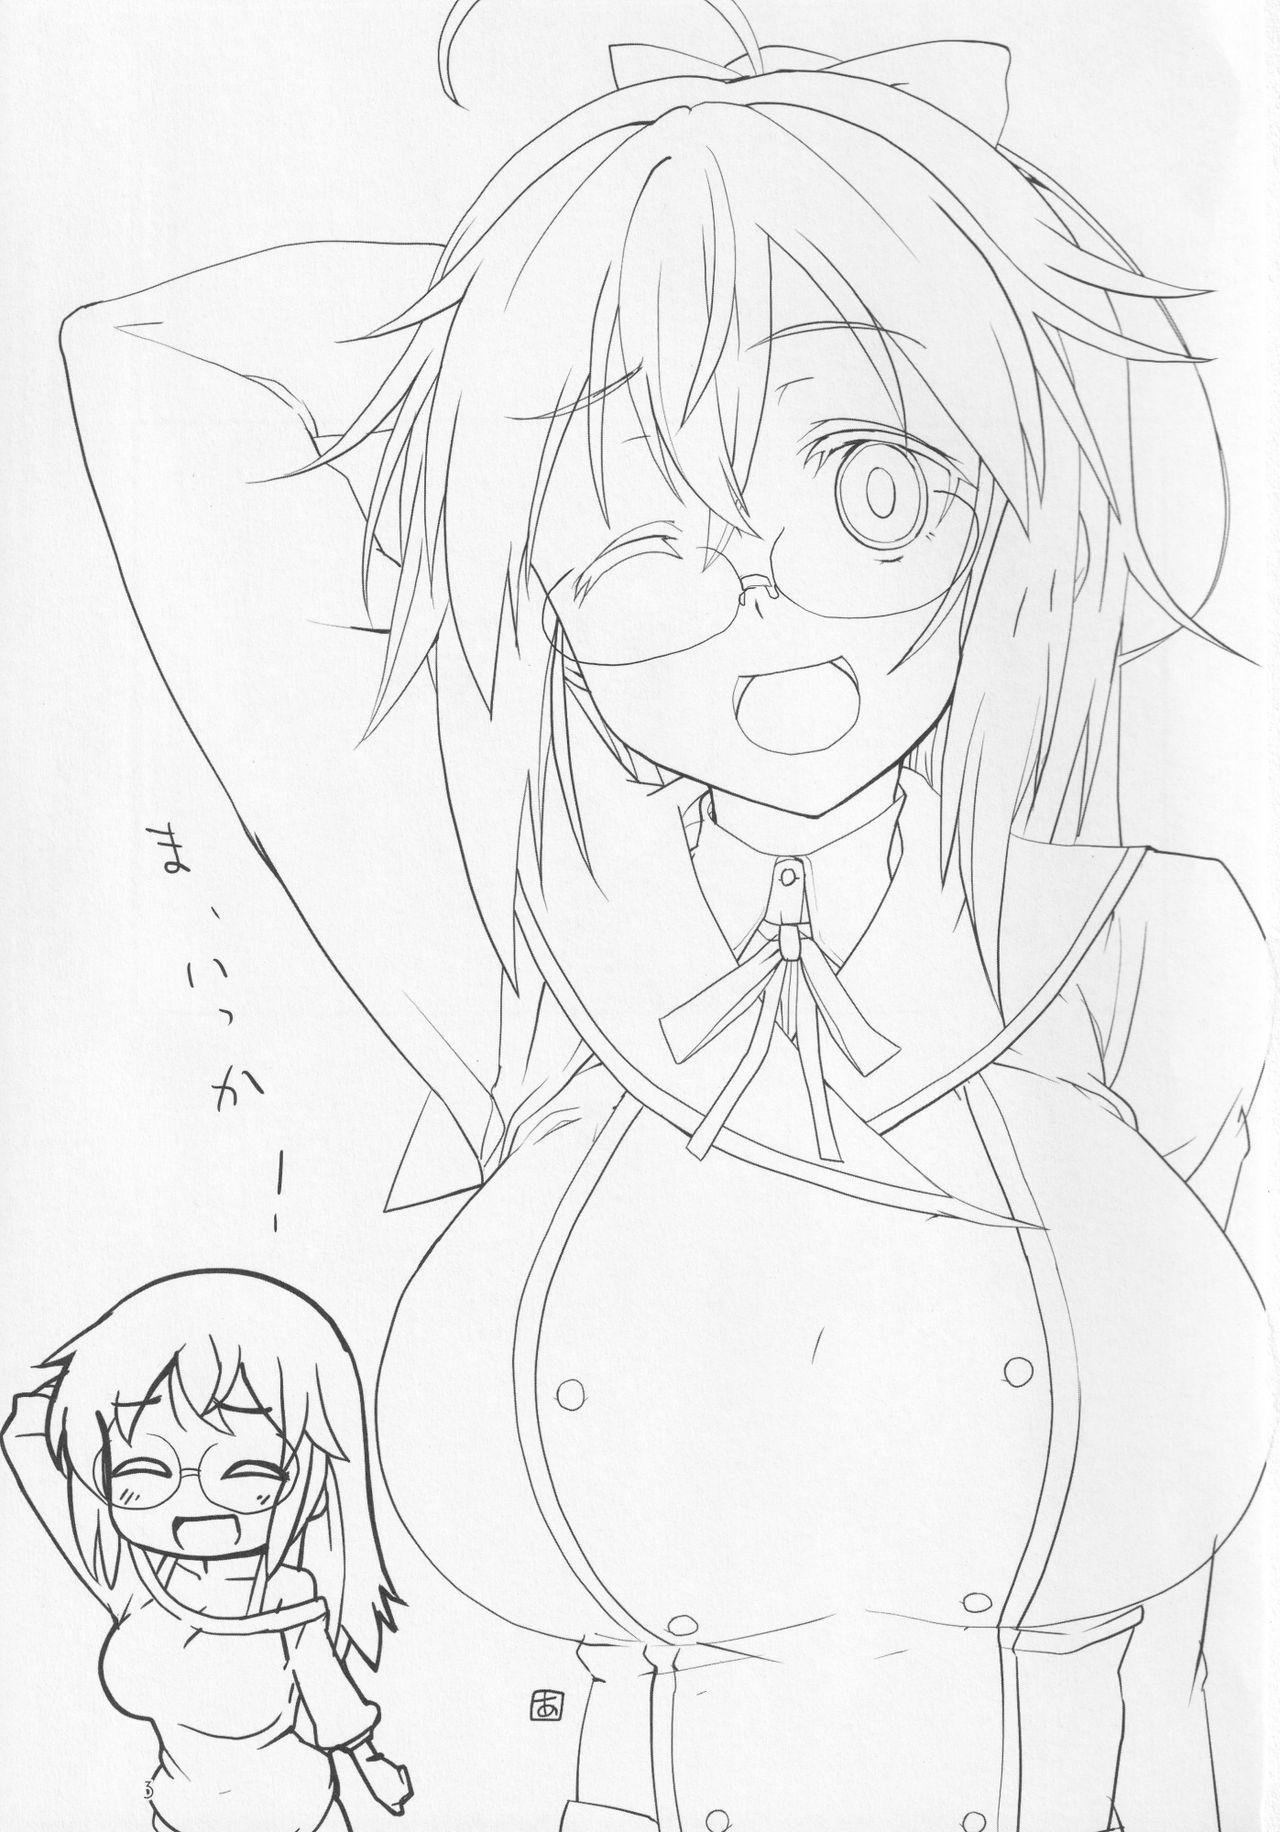 Teenfuns Ma Ikka! - Alice gear aegis Frame arms girl Pussy Fucking - Page 2